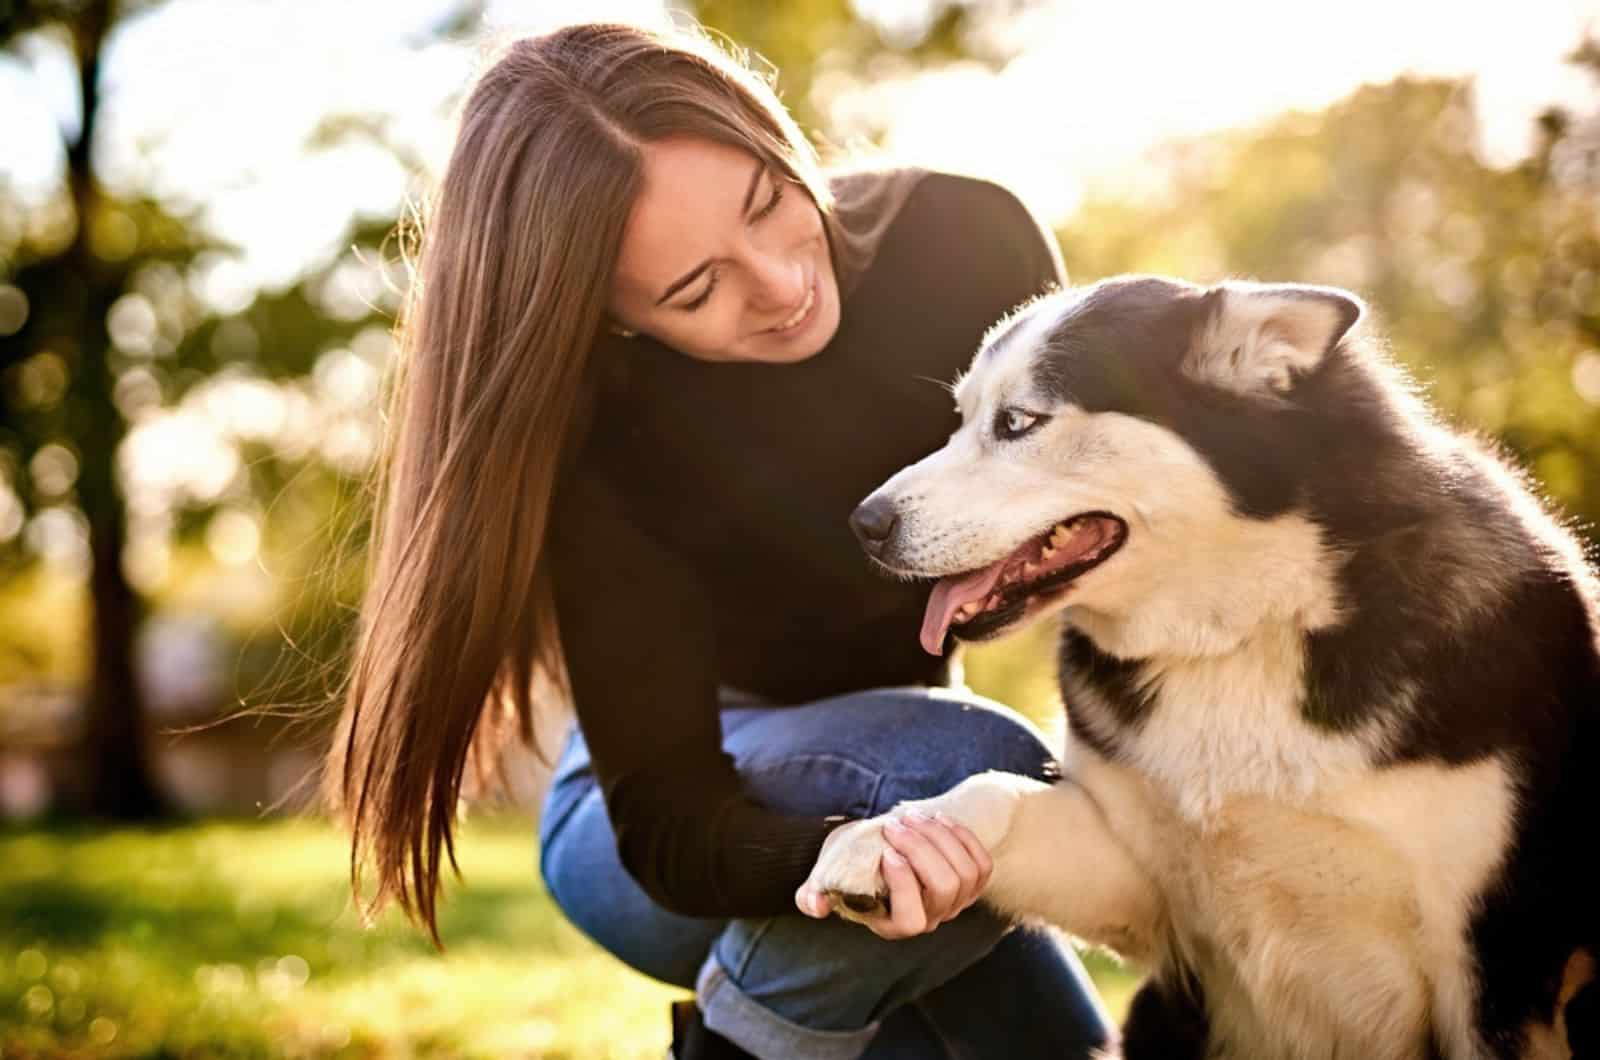 7 Actual Answers To Why Does My Husky Put His Paw On Me?